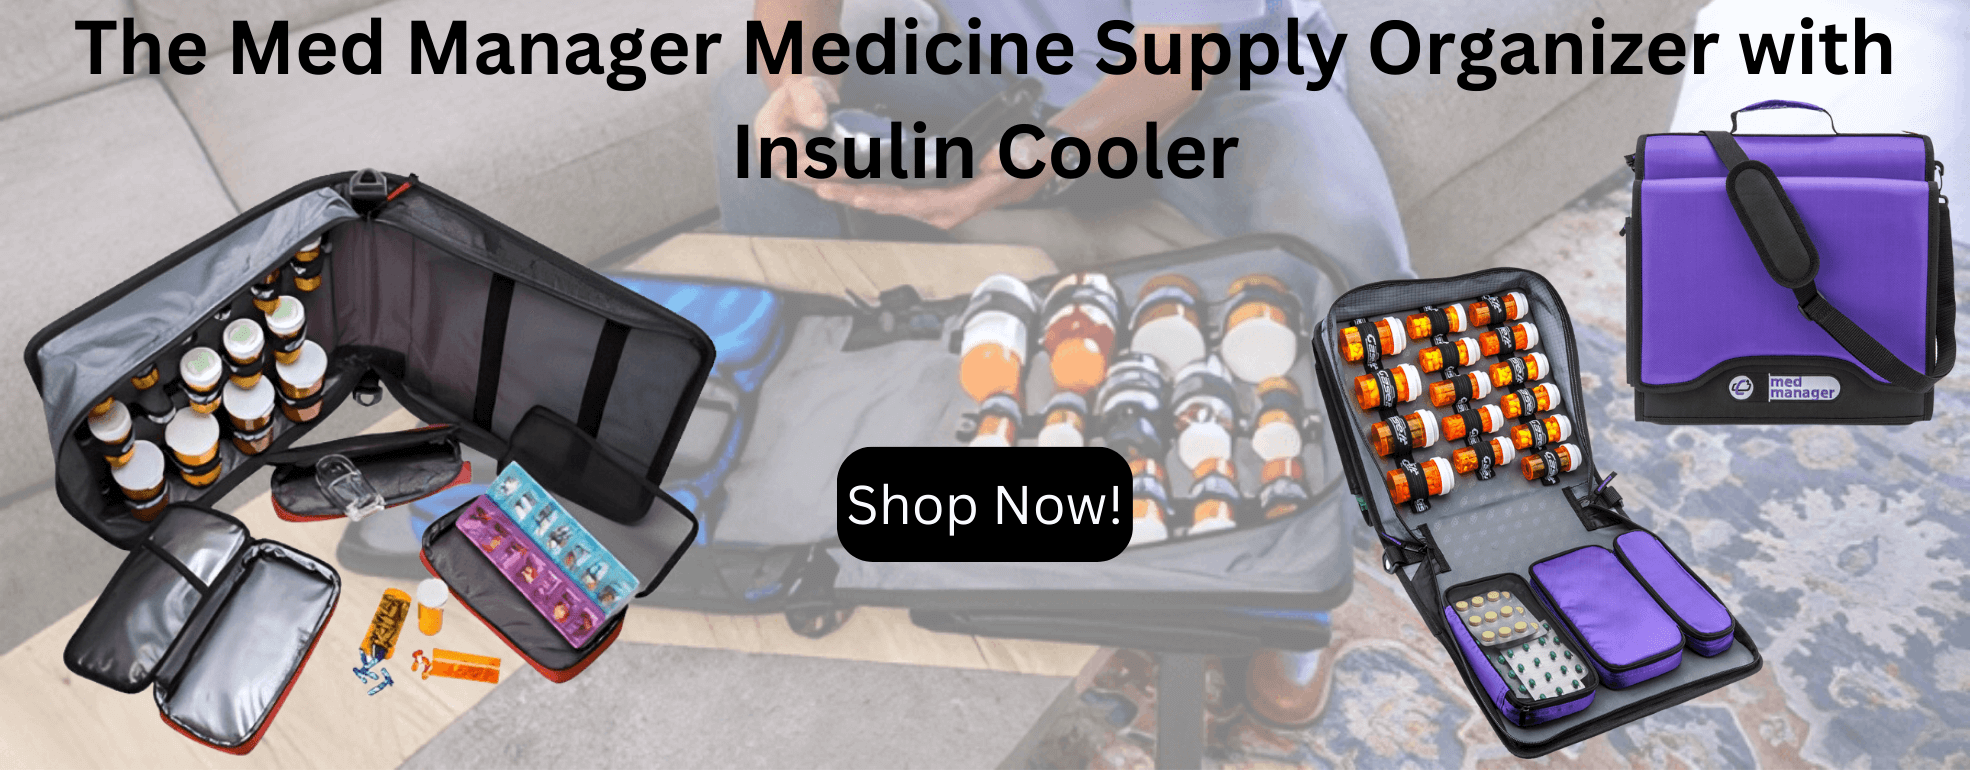 https://cdn11.bigcommerce.com/s-6dpzi5pd3/images/stencil/original/carousel/22/The_Med_Manager_Medicine_Supply_Organizer_with_Insulin_Cooler_1.png?c=1